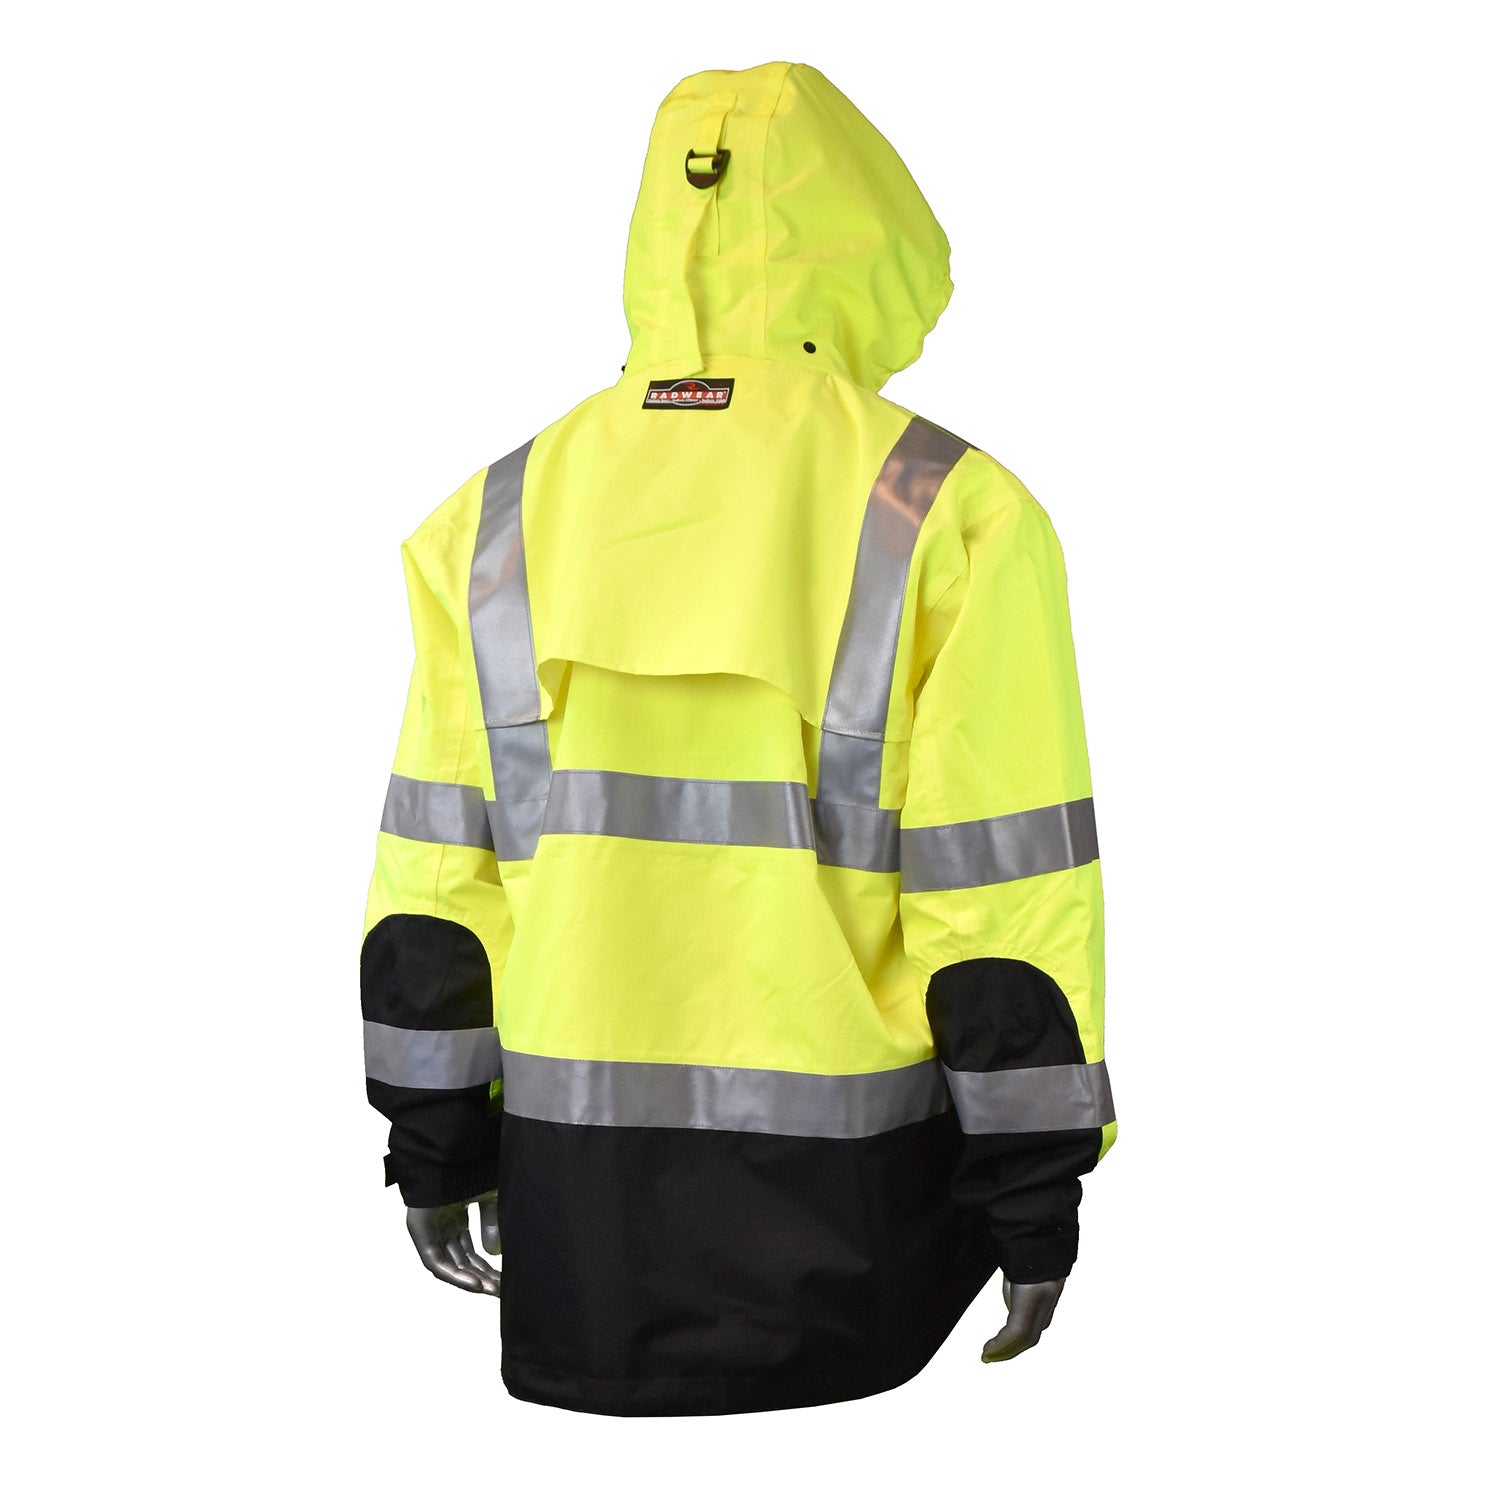 Chaqueta impermeable Ripstop resistente RW32 Radians Clase 3 Tipo R